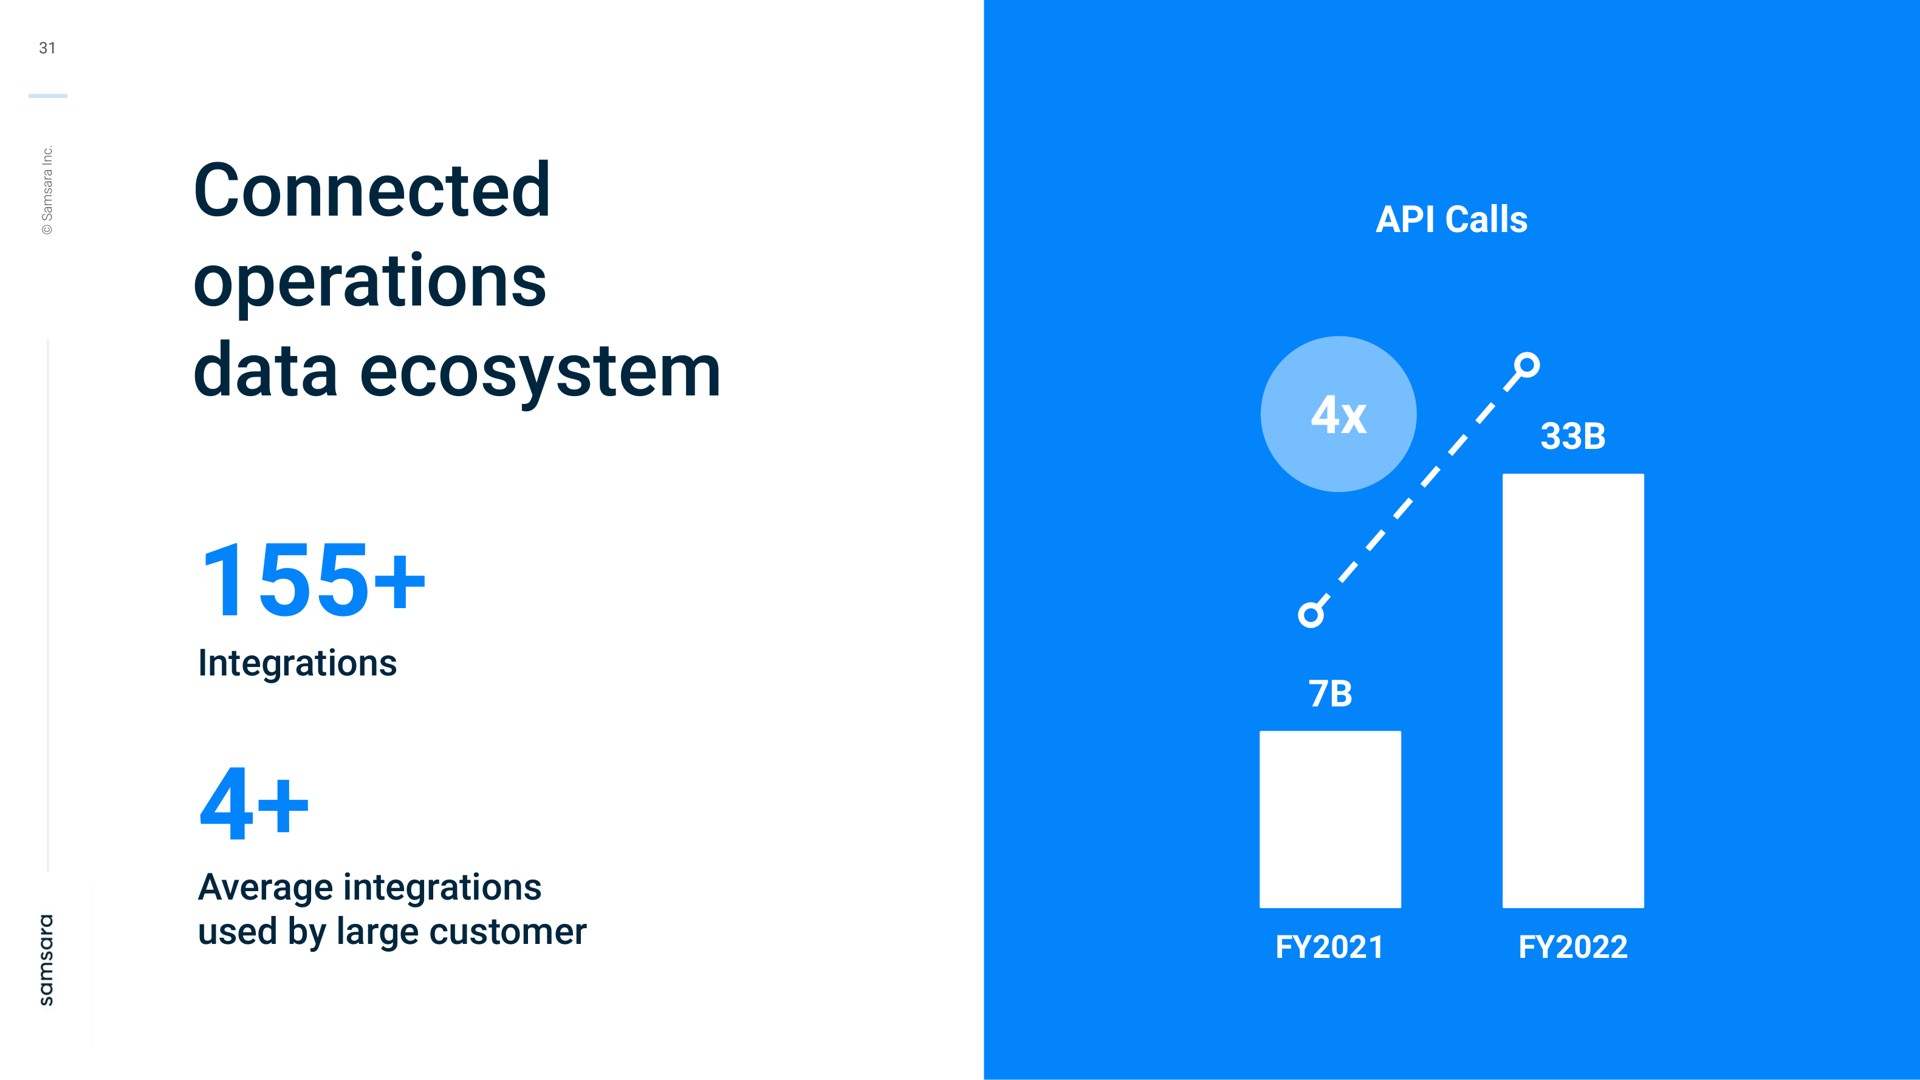 connected operations data ecosystem integrations average integrations used by large customer calls | Samsara